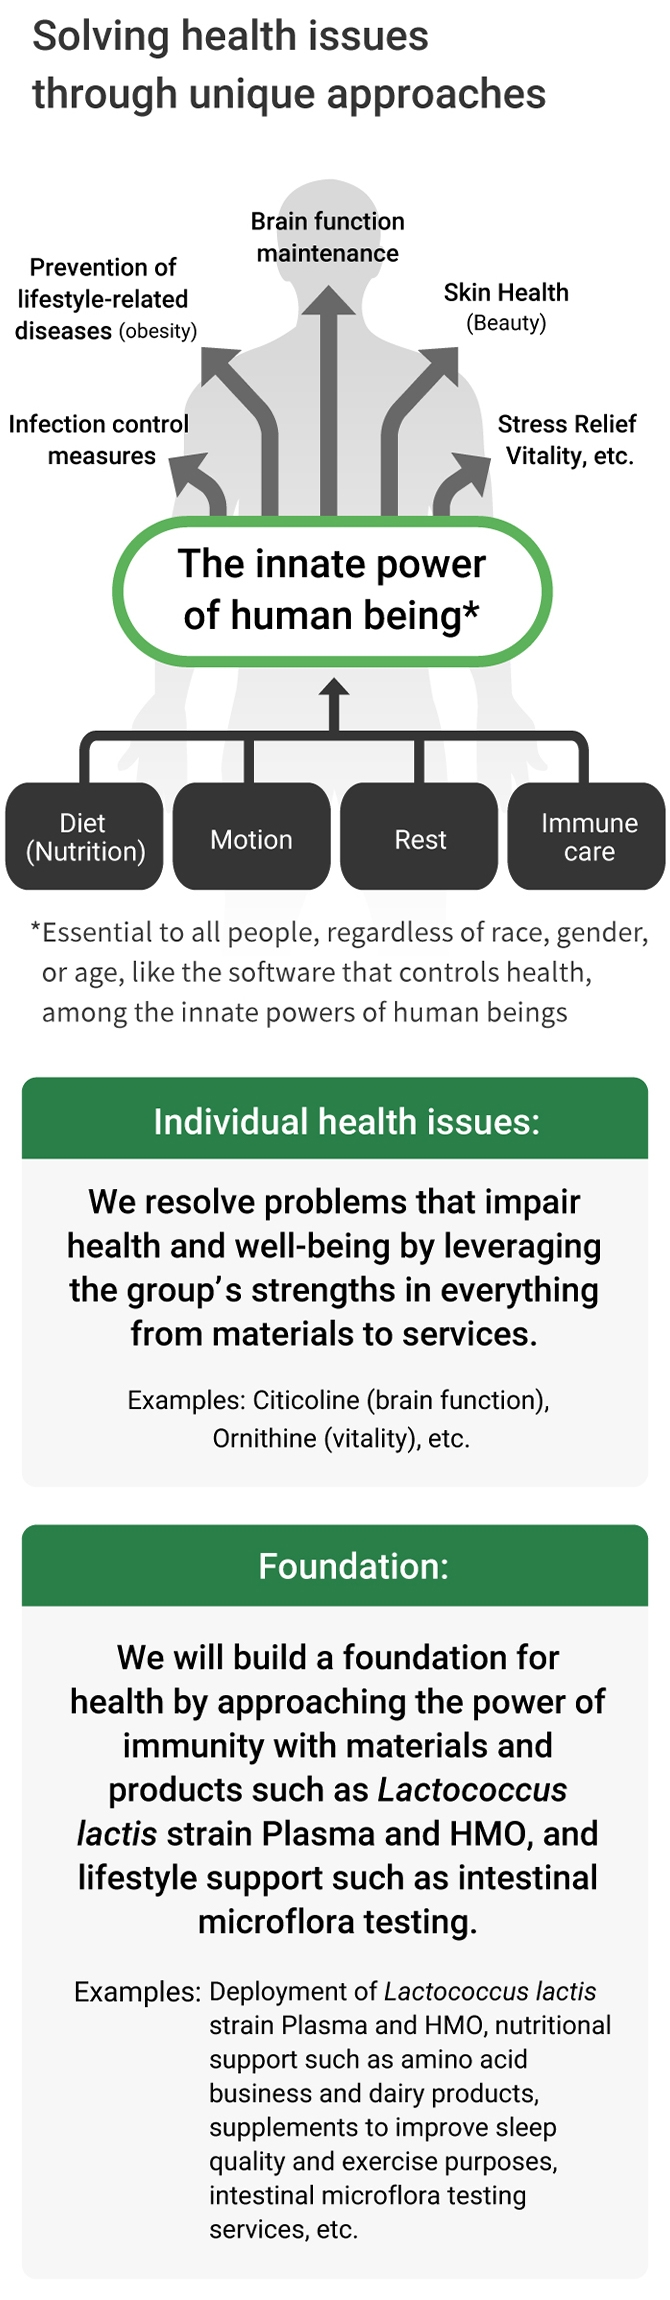 Figure: SoIving health issues through unique approaches